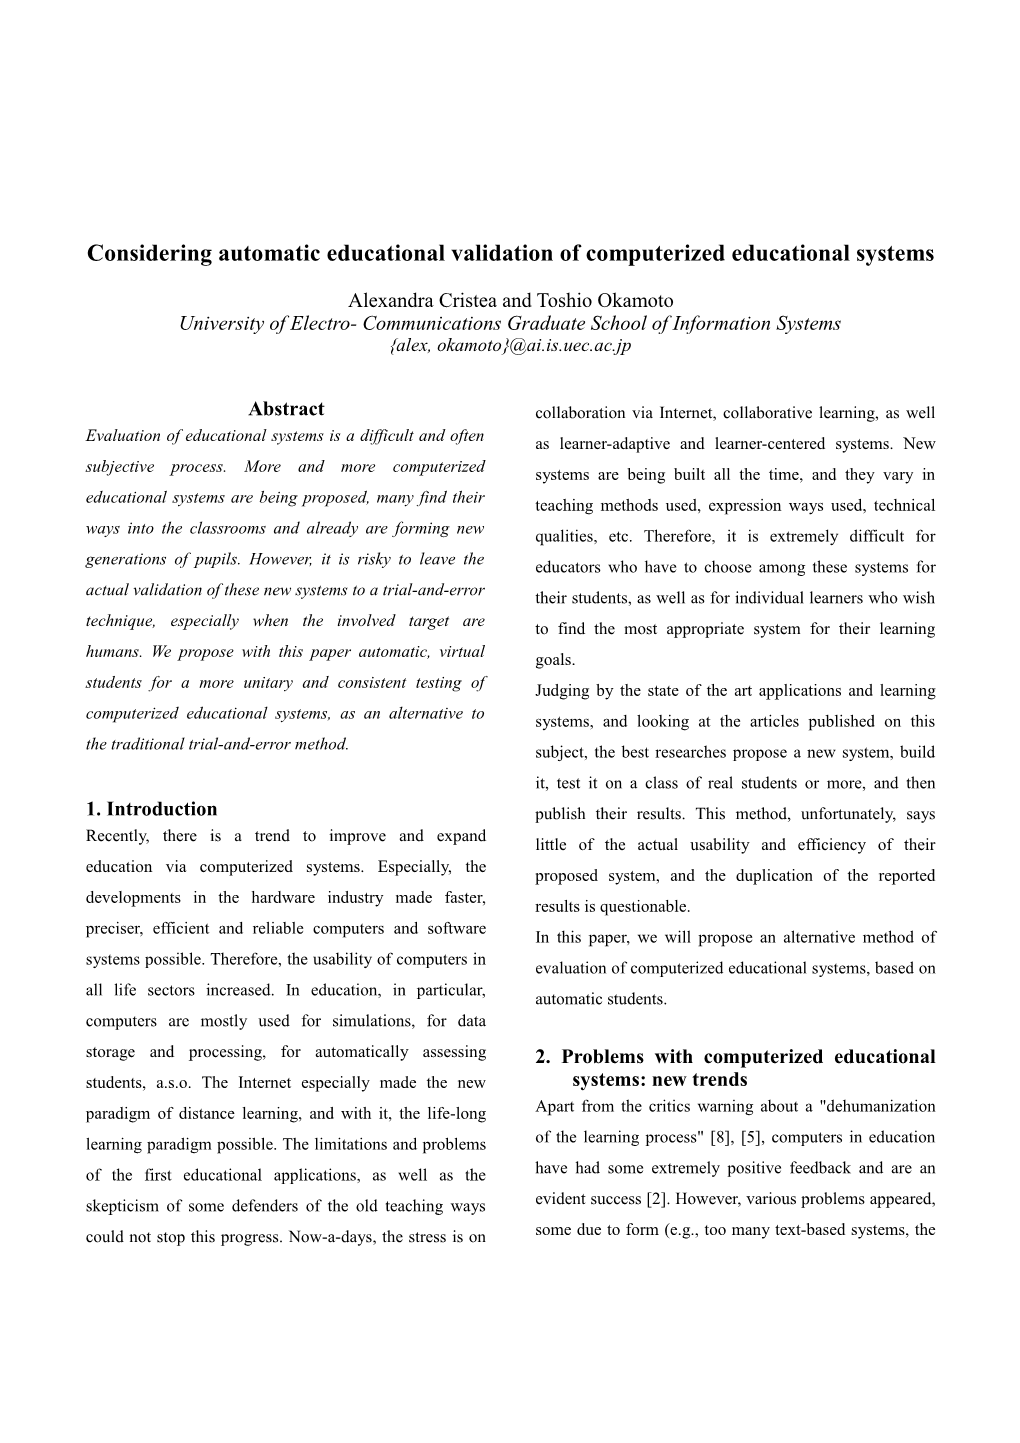 Considering Automatic Educational Validation of Computerized Educational Systems